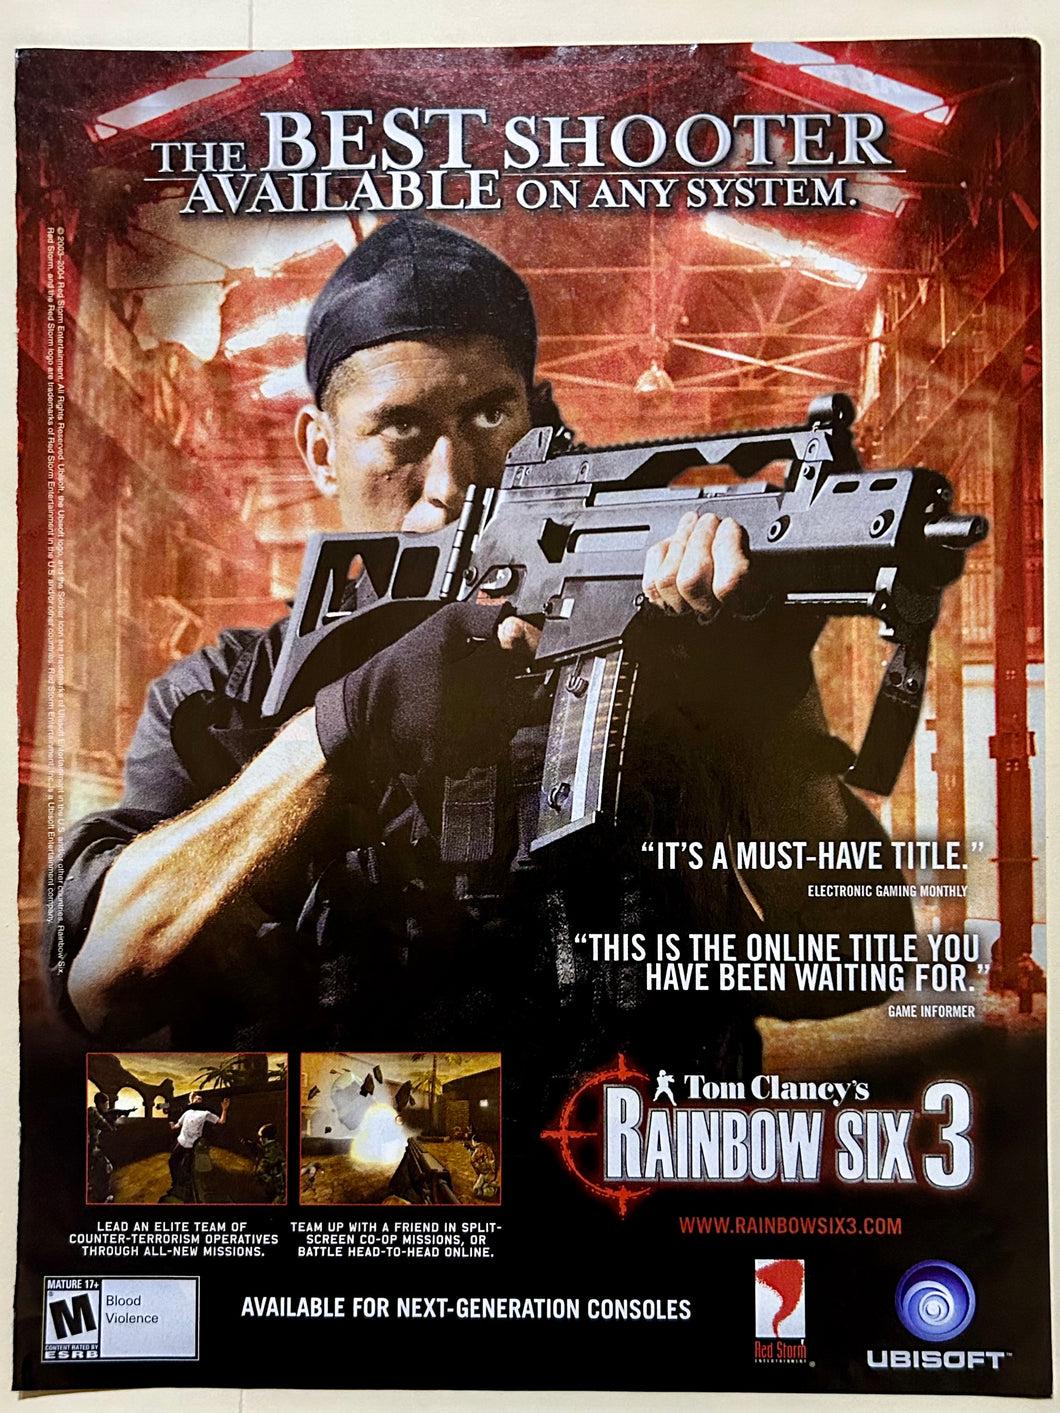 Tom Clancy’s Rainbow Six 3 - PS2 Xbox NGC - Original Vintage Advertisement - Print Ads - Laminated A4 Poster